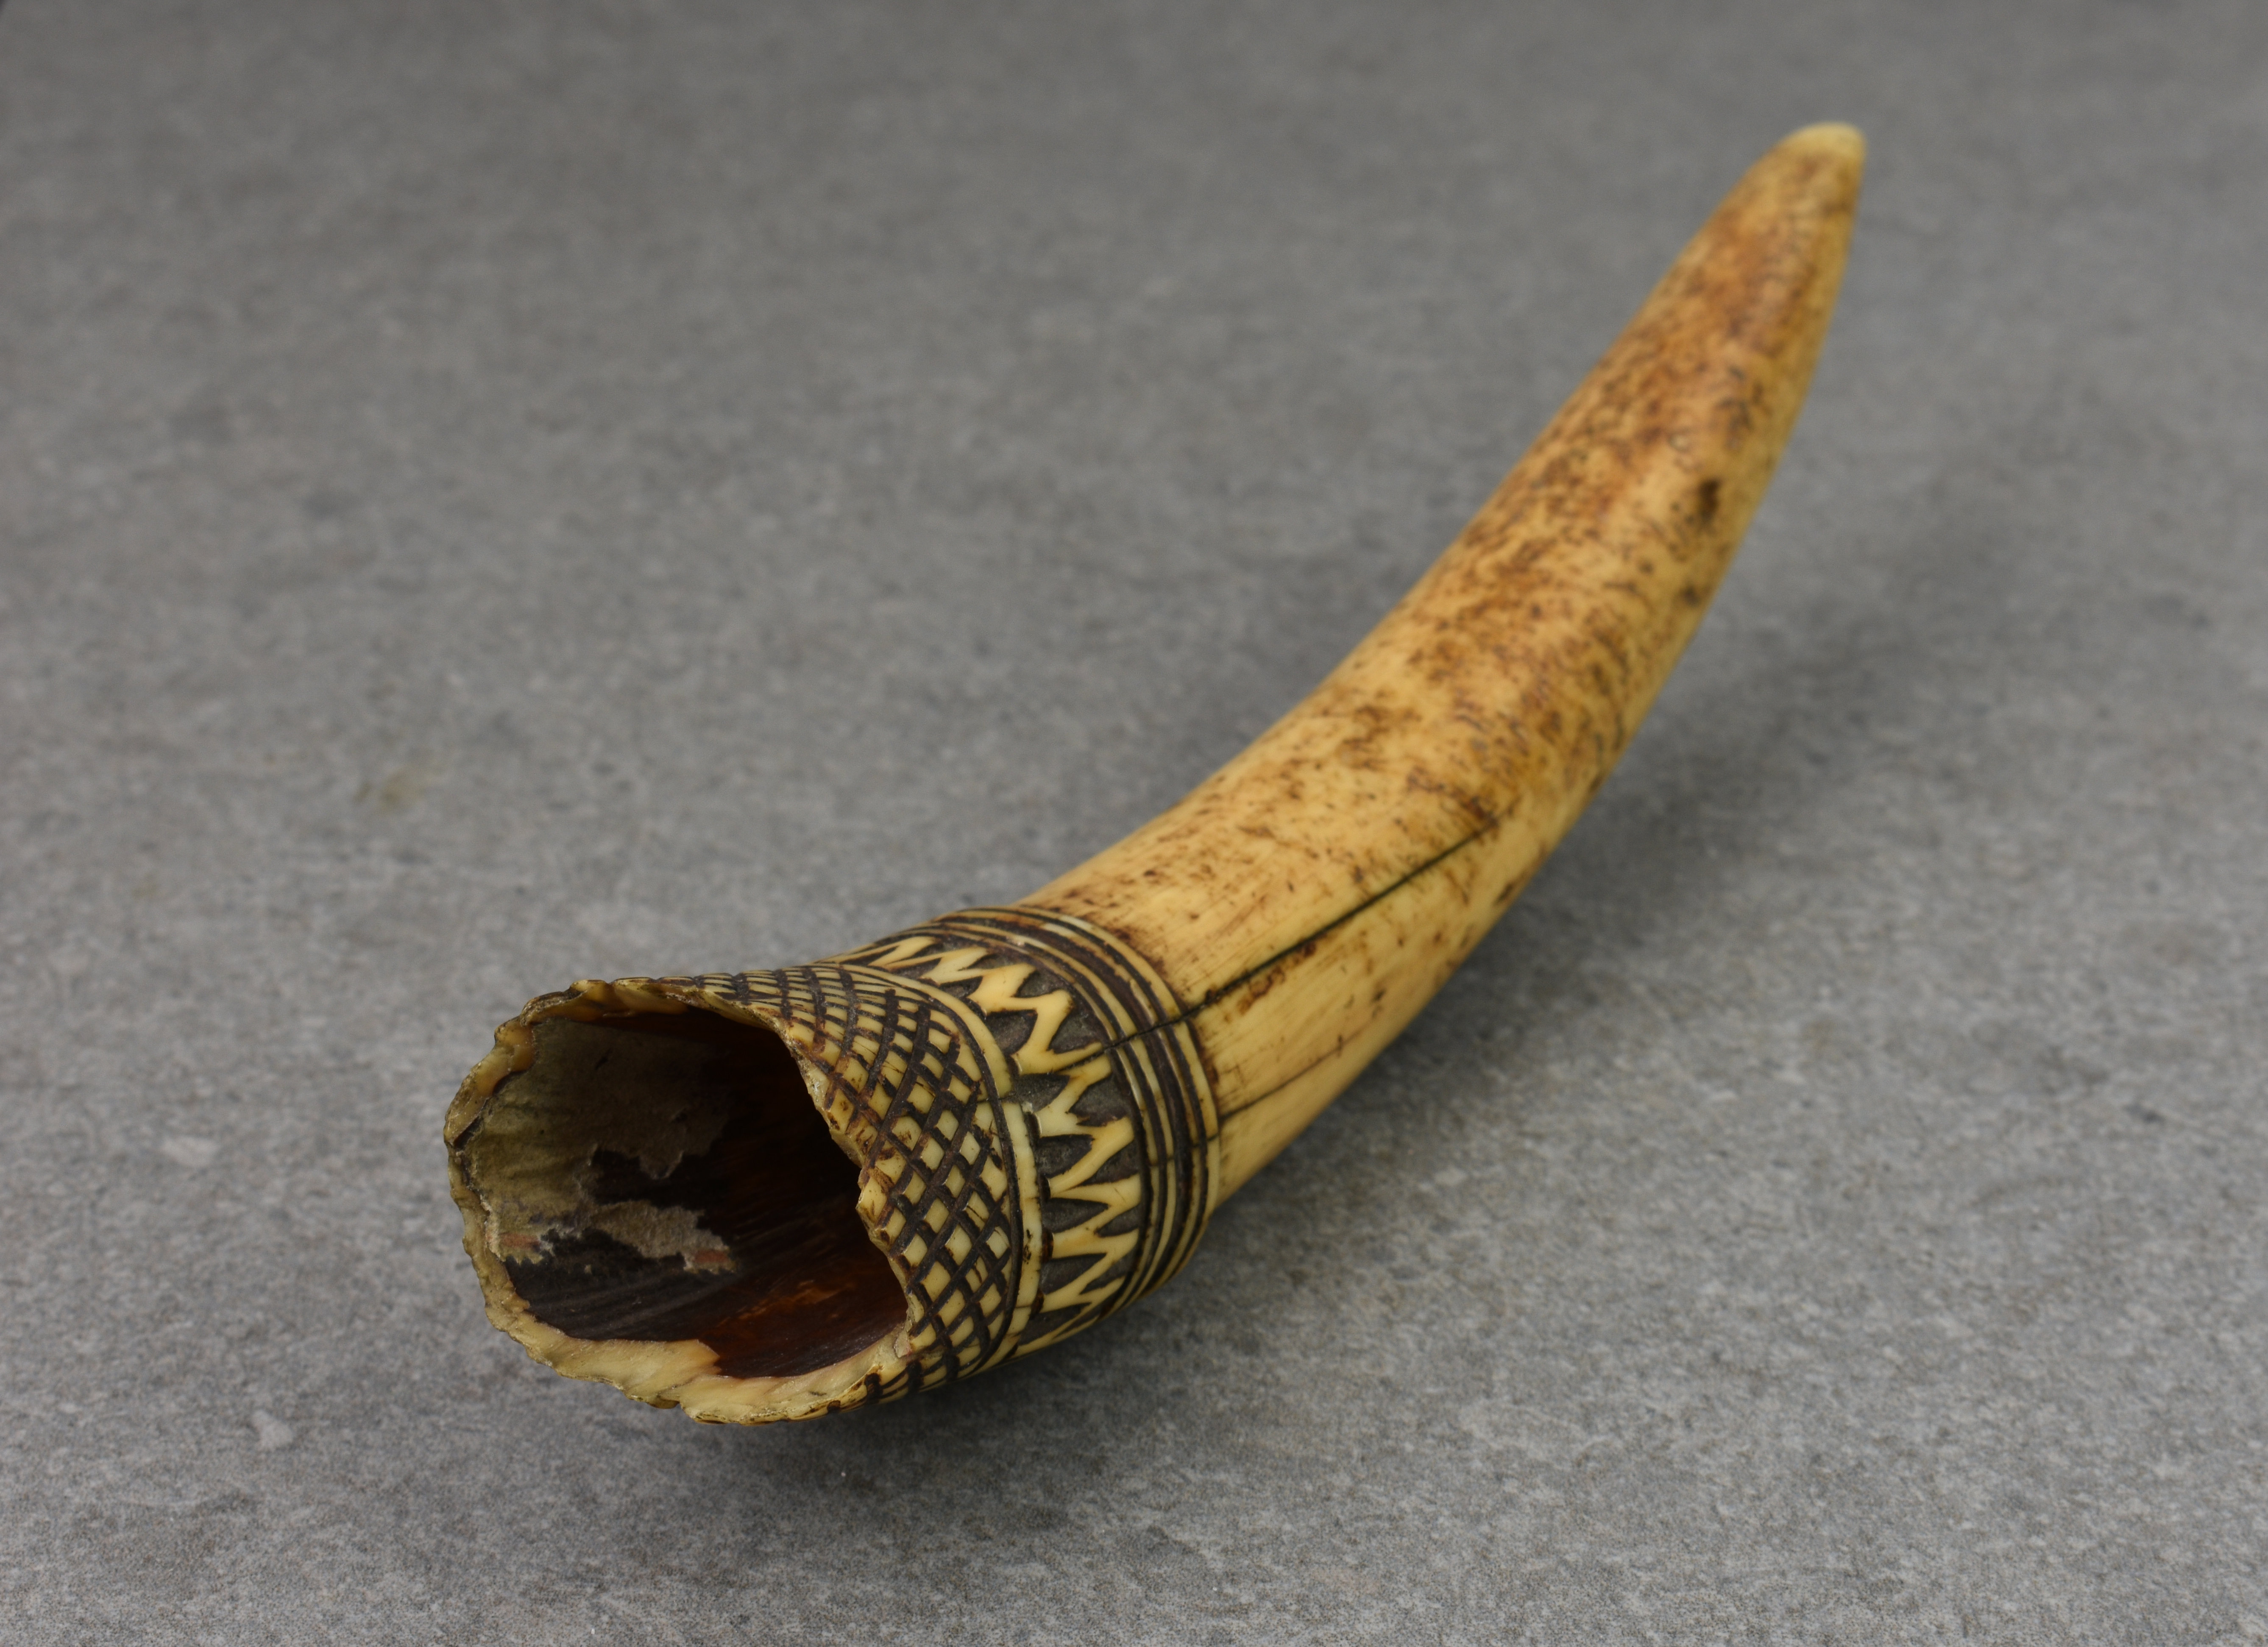 A 19th century or earlier carved African tribal tusk ornament, probably used hanging from a - Image 3 of 3